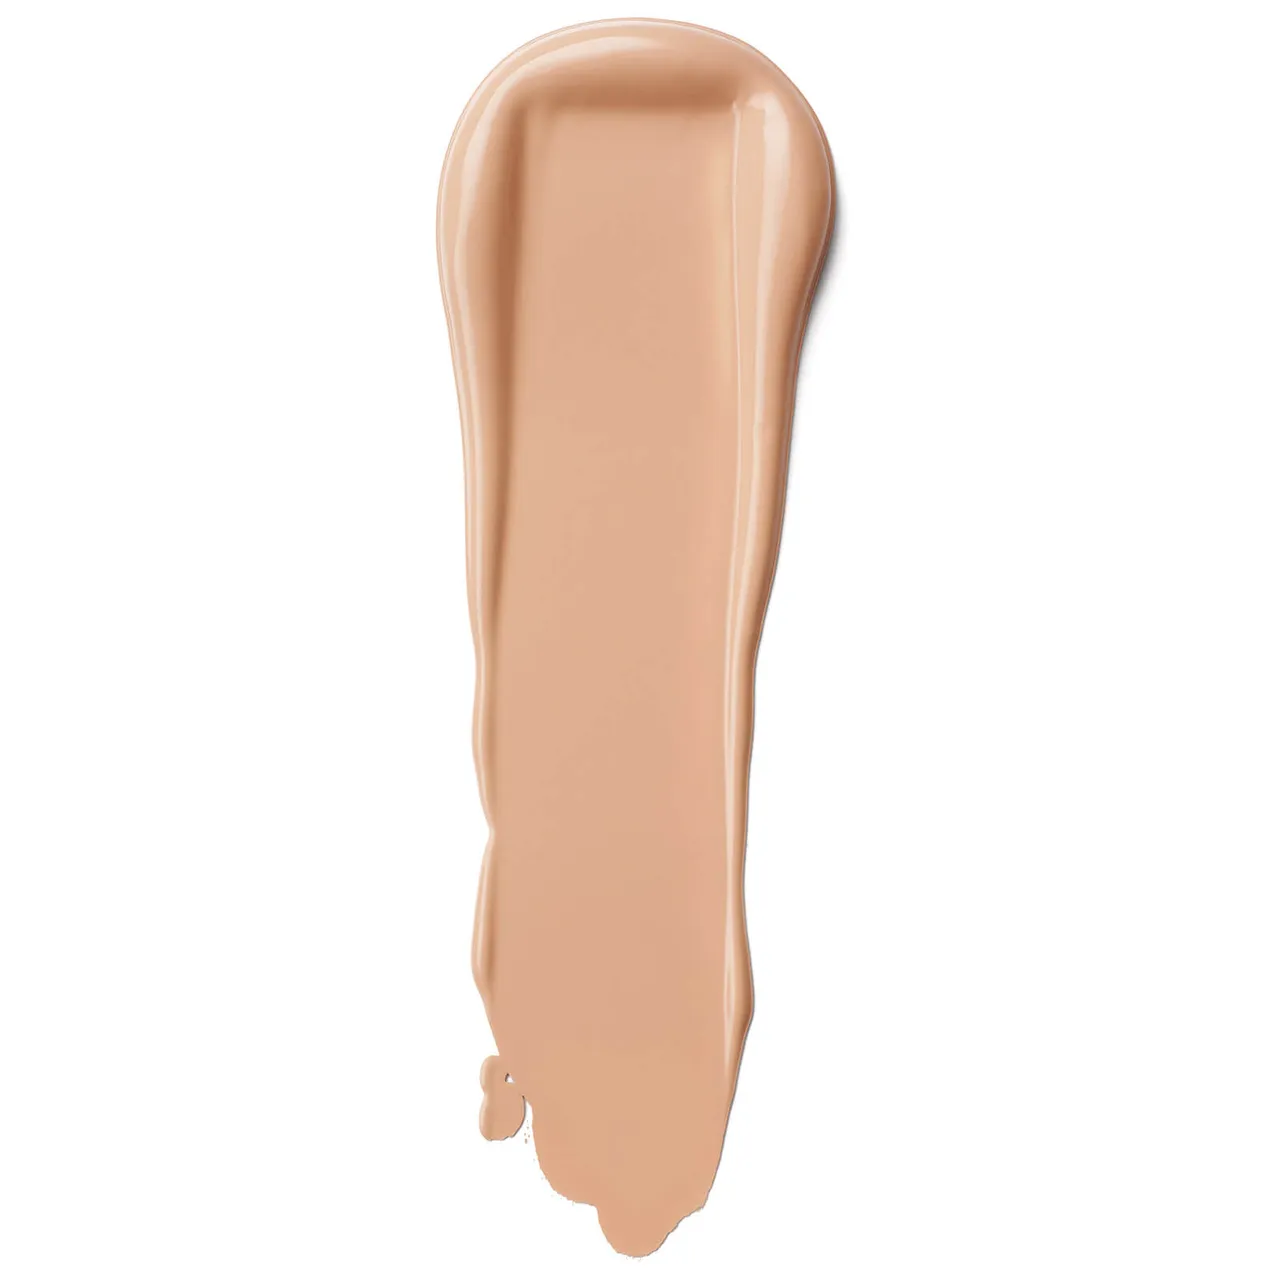 Clinique Beyond Perfecting Foundation and Concealer 30ml (Various Shades) - Cream Chambois